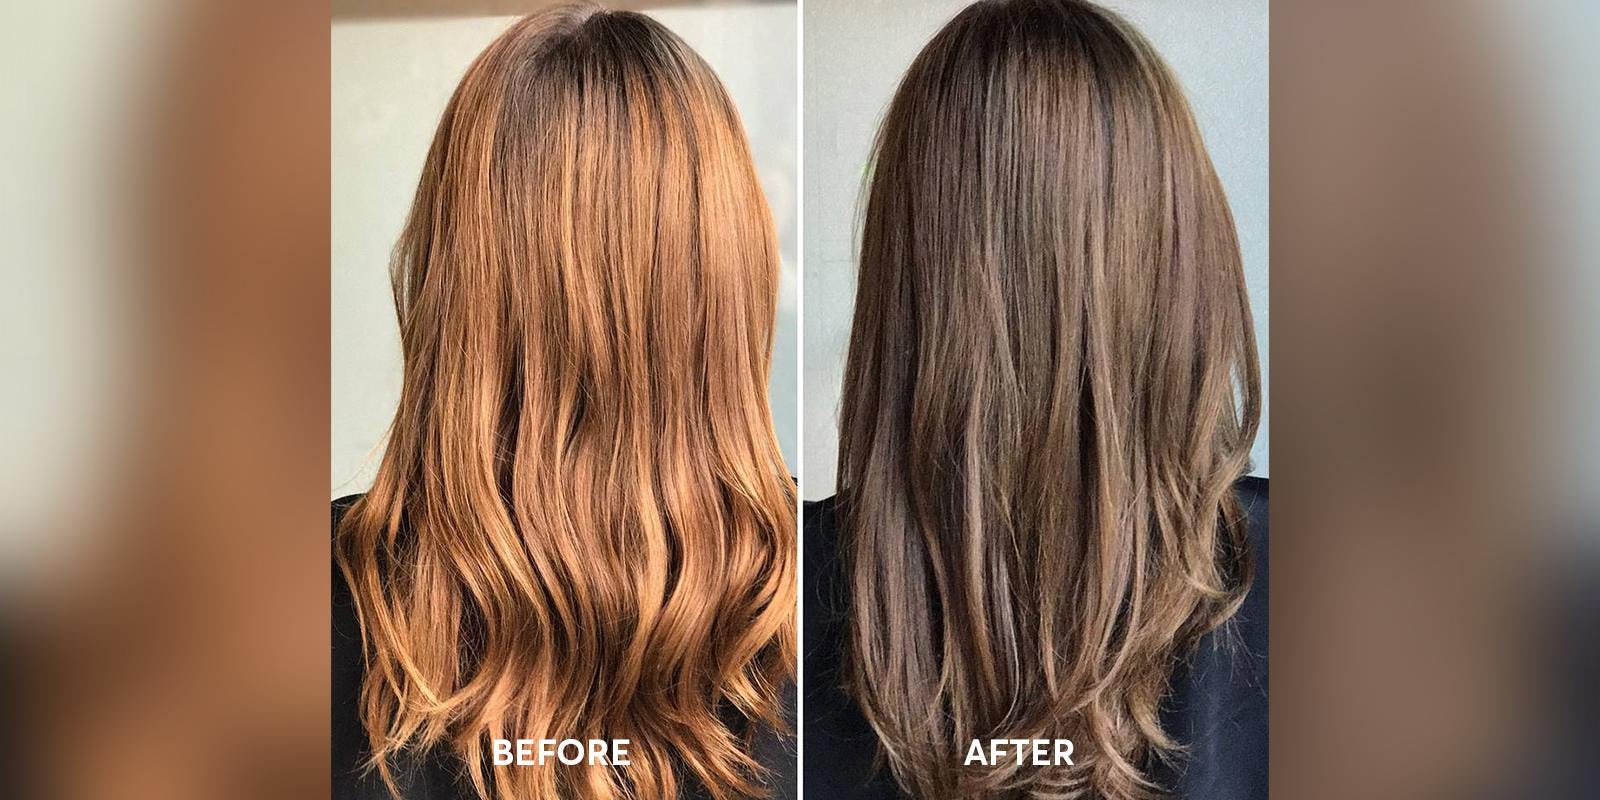 Before and After of Veneto Hair color application